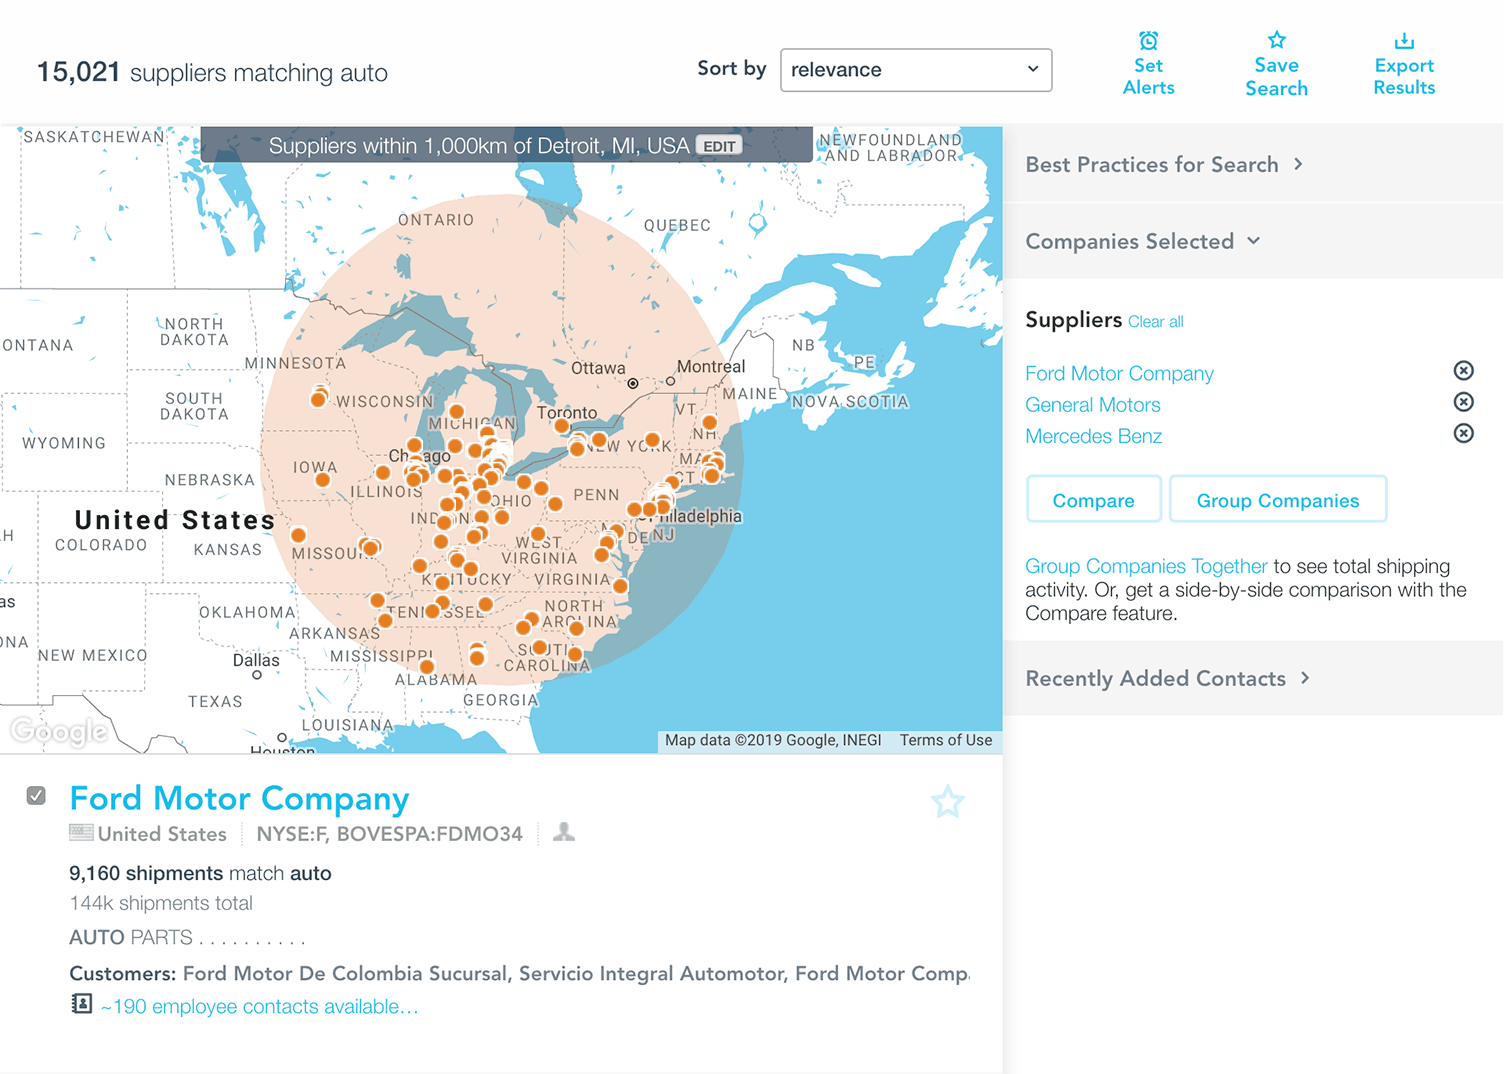 Search by Location in the U.S.